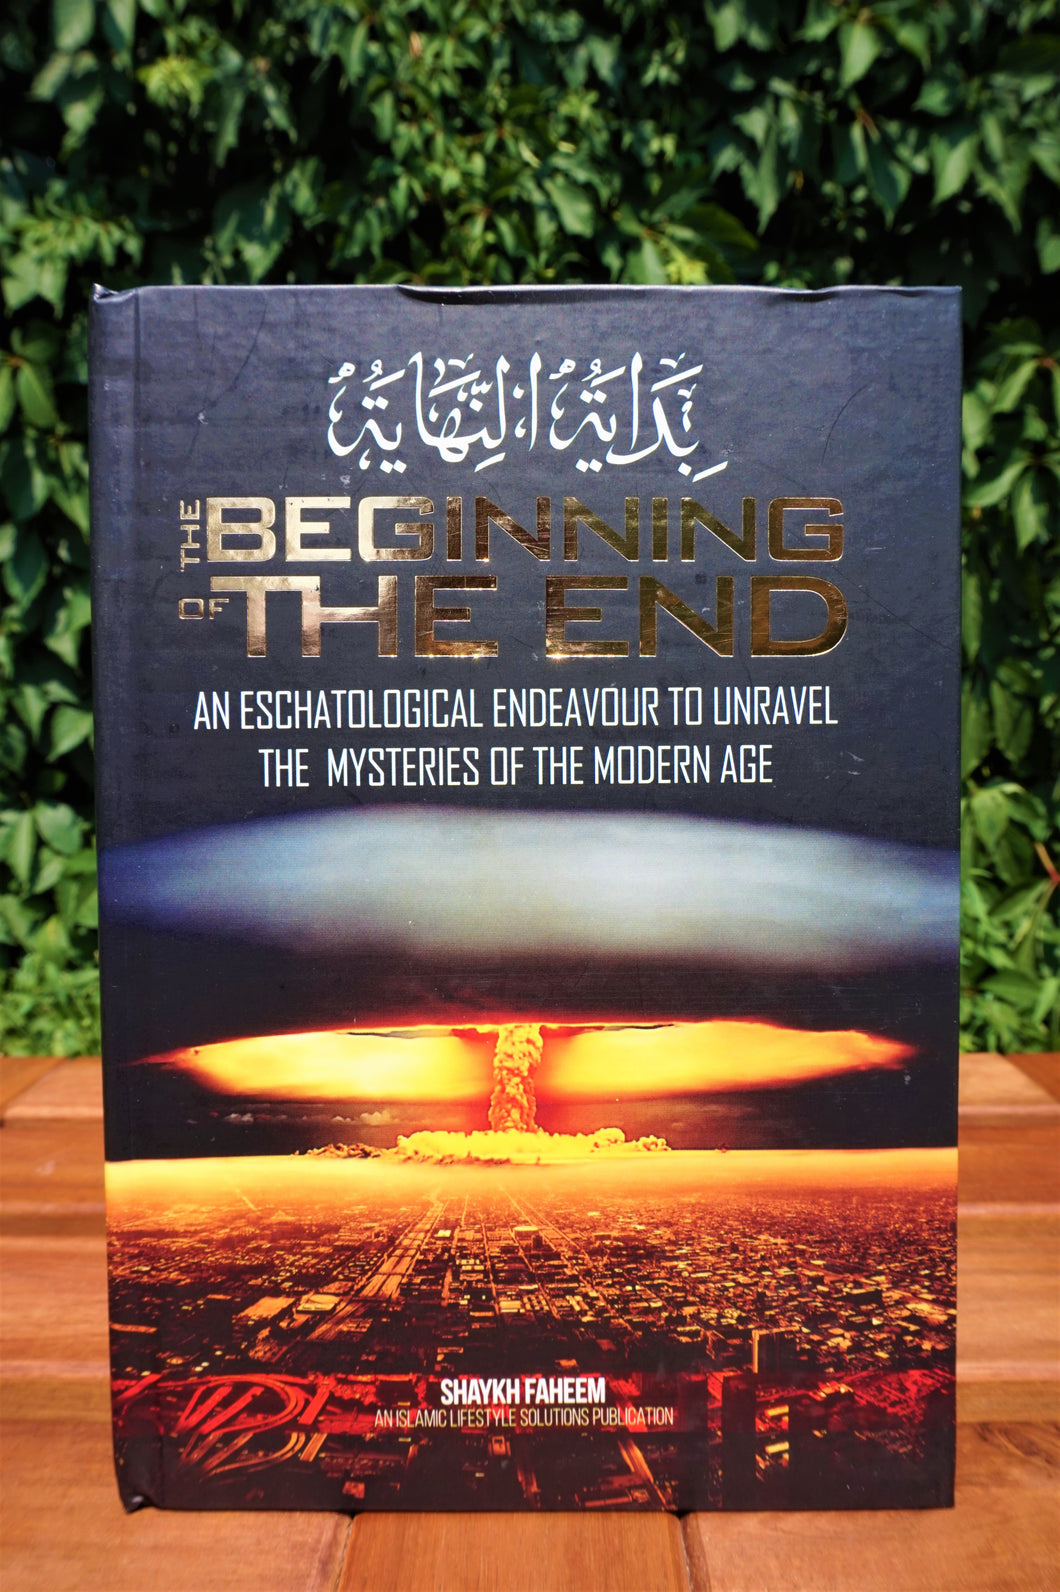 Front cover of the book The Beginning of the End - An Eschatological Endeavour to Unravel the Mysteries of the Modern Age